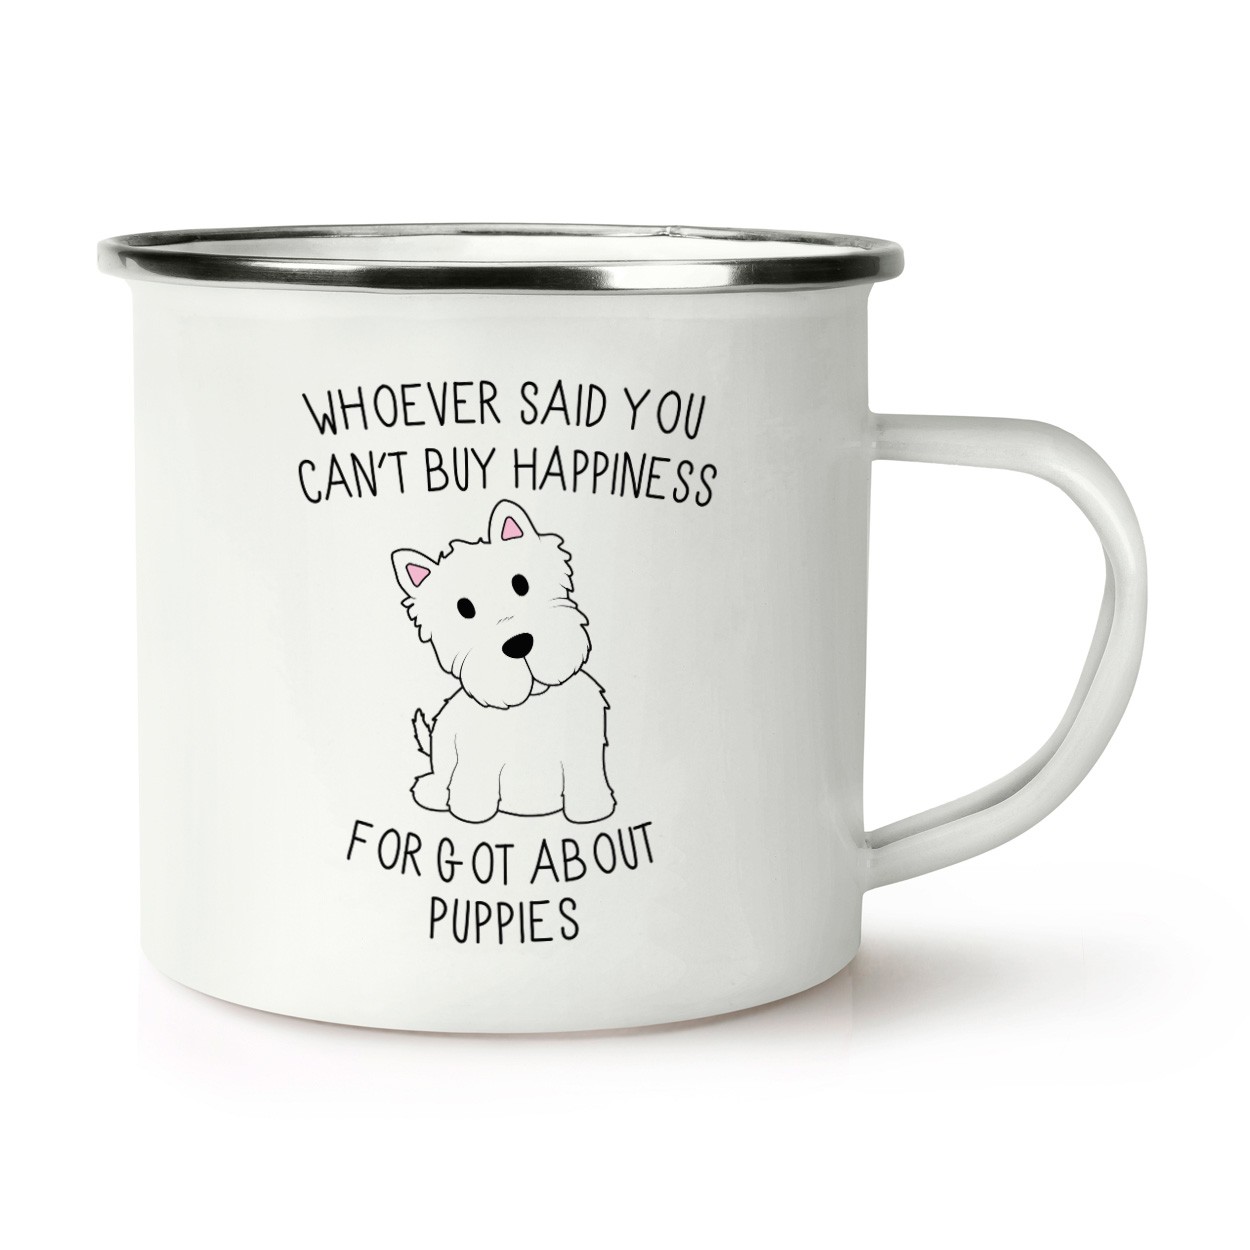 Whoever Said You Can't Buy Happiness Forgot About Puppies Retro Enamel Mug Cup